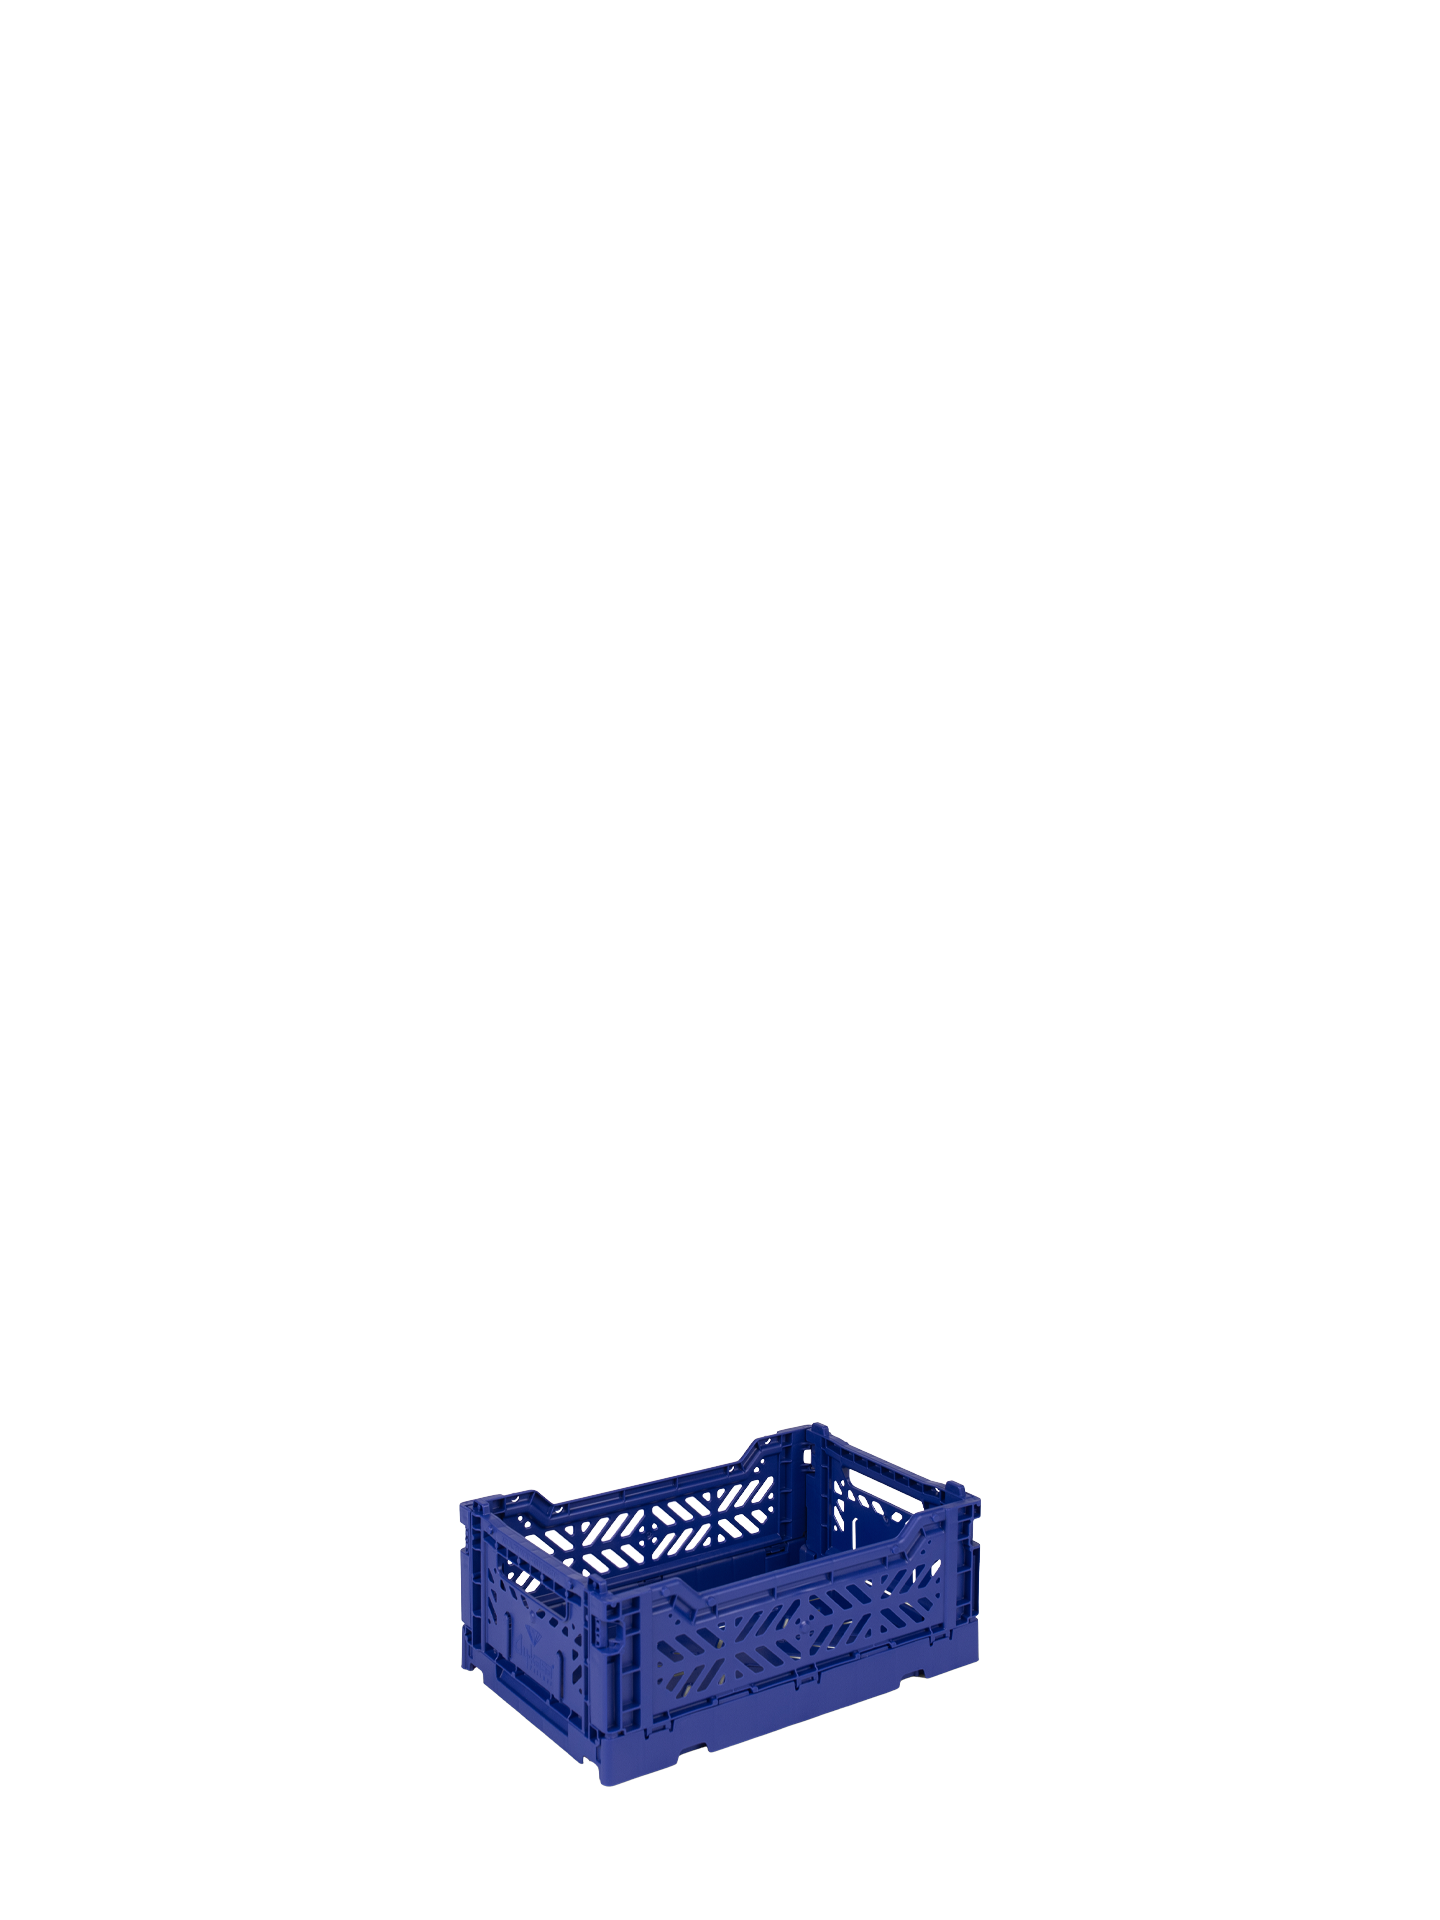 Mini Aykasa crate in Saks blue stacks and folds